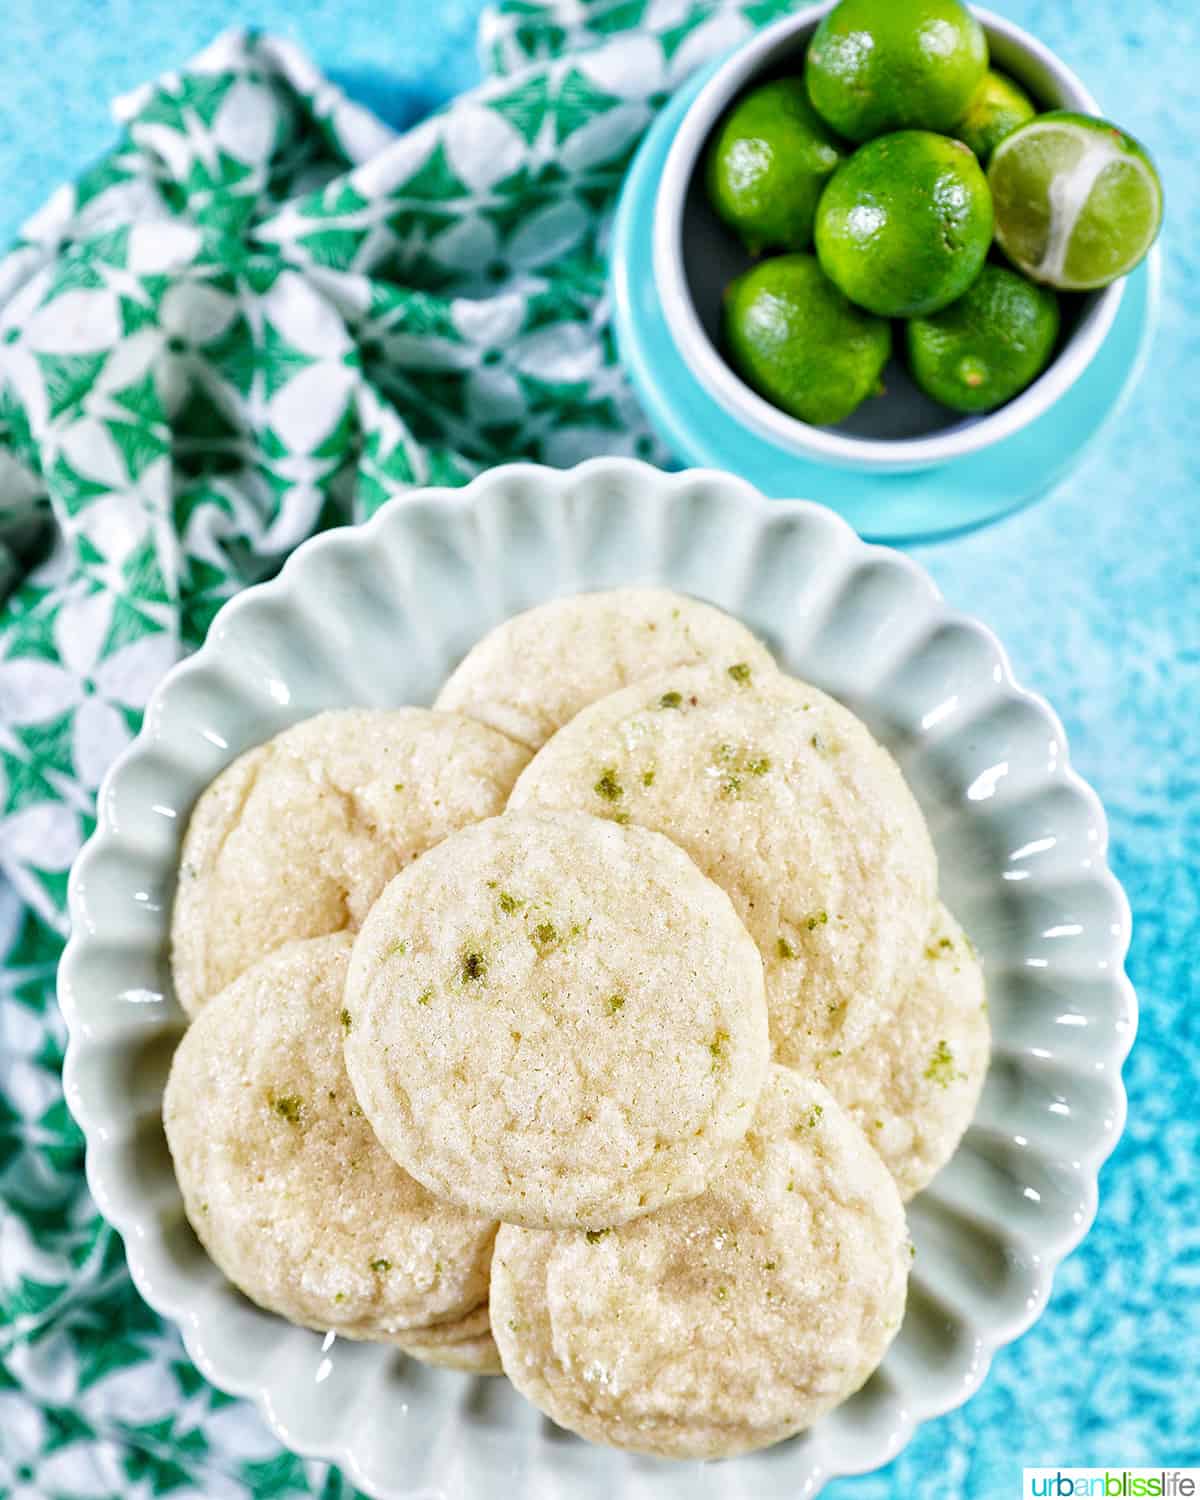 several key lime cookies on a scalloped plate with a bowl of key limes above and a bright blue background.